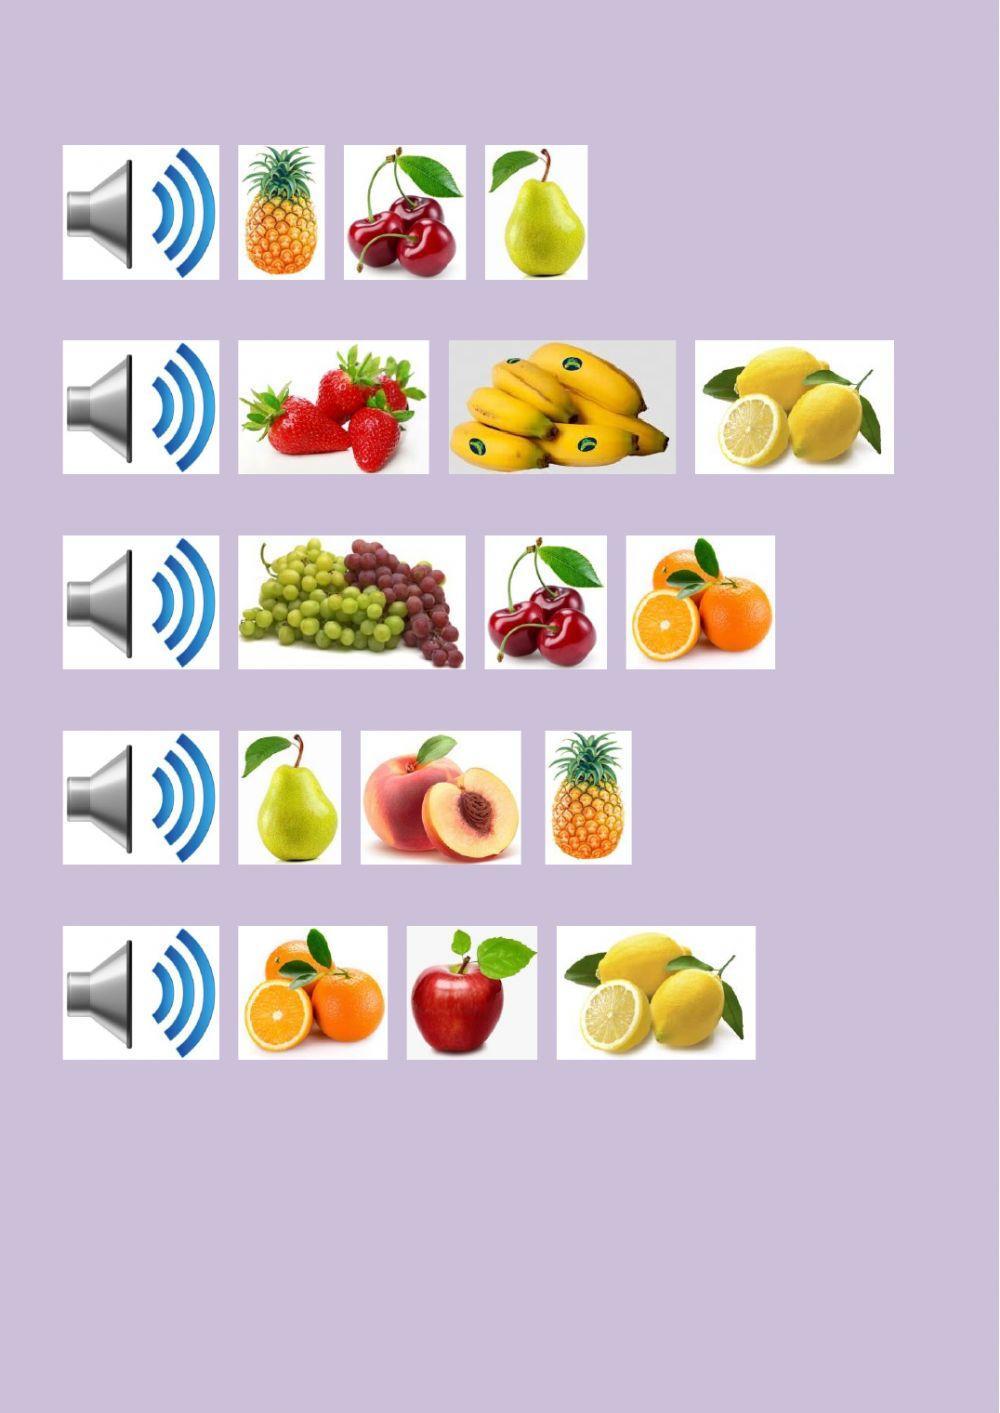 Fruits. Listen and choose.